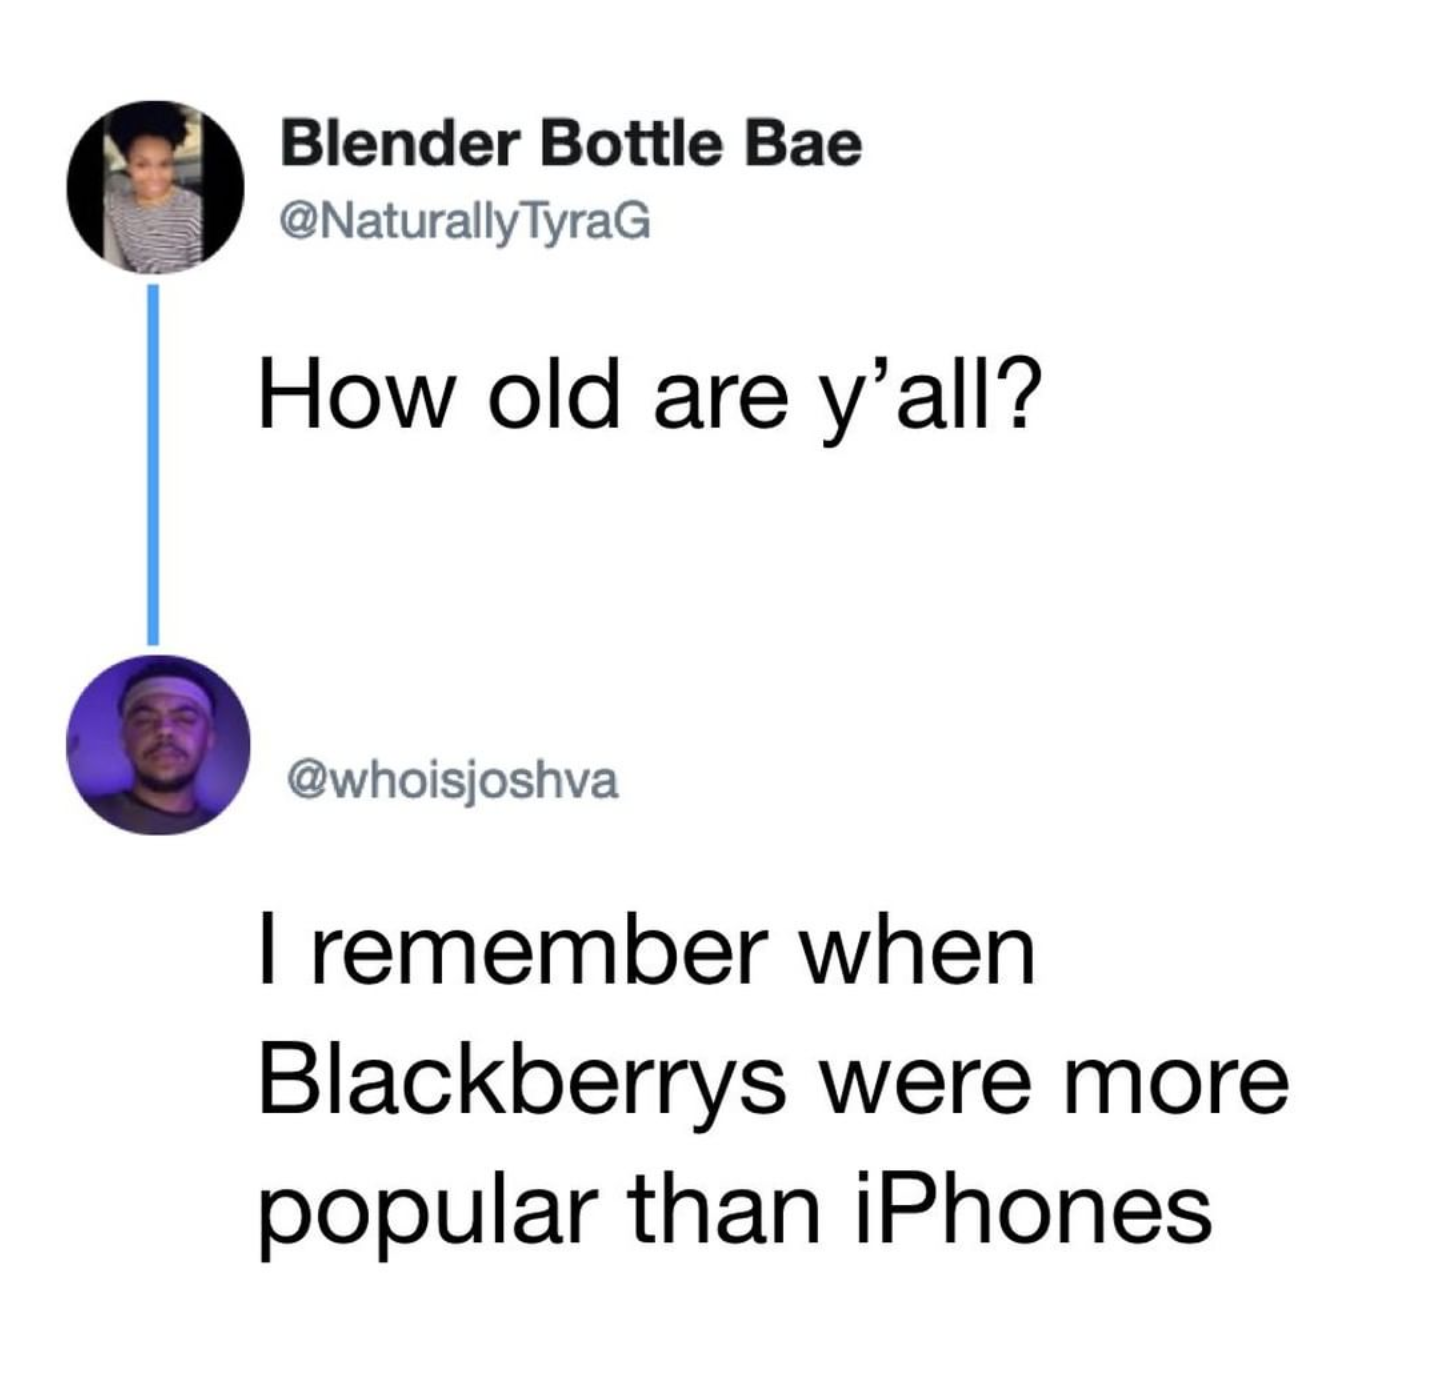 And nokia were best seller